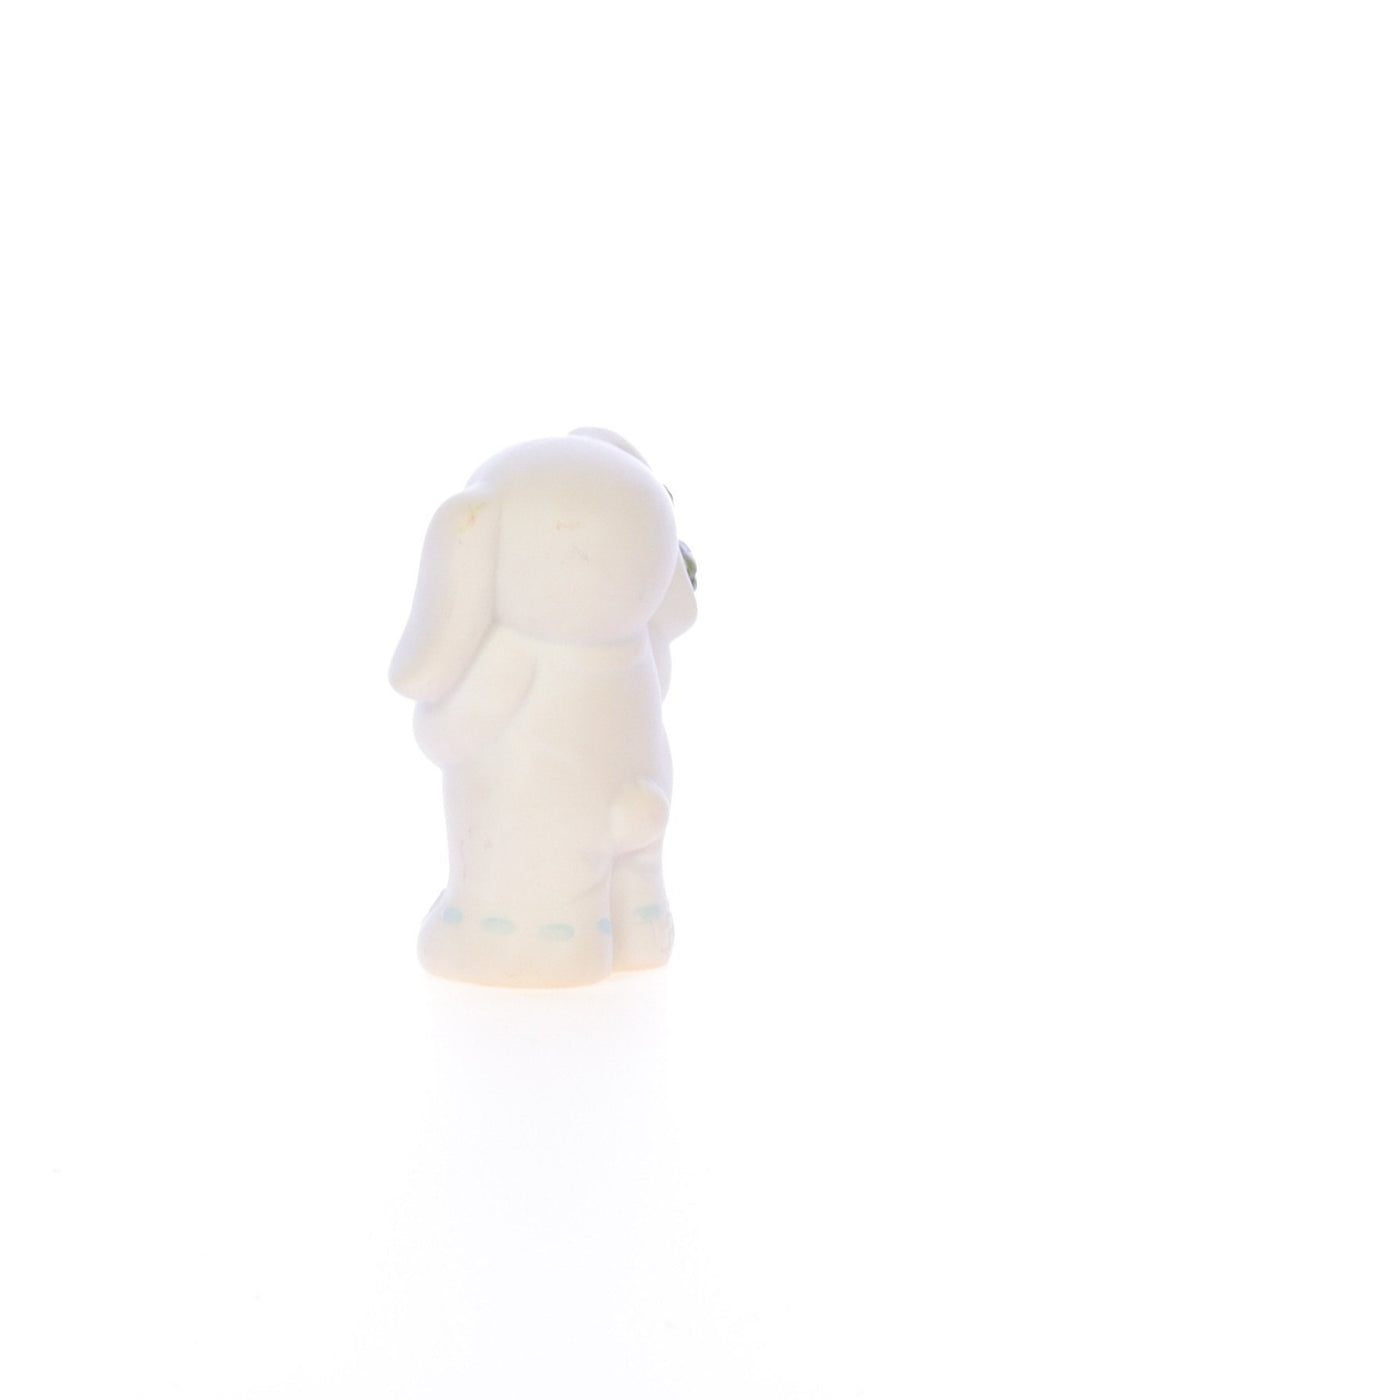 Lucy_And_Me_by_Lucy_Atwell_Porcelain_Figurine_Bear_in_Easter_Bunny_Costume_Lucy_Unknown_040_04